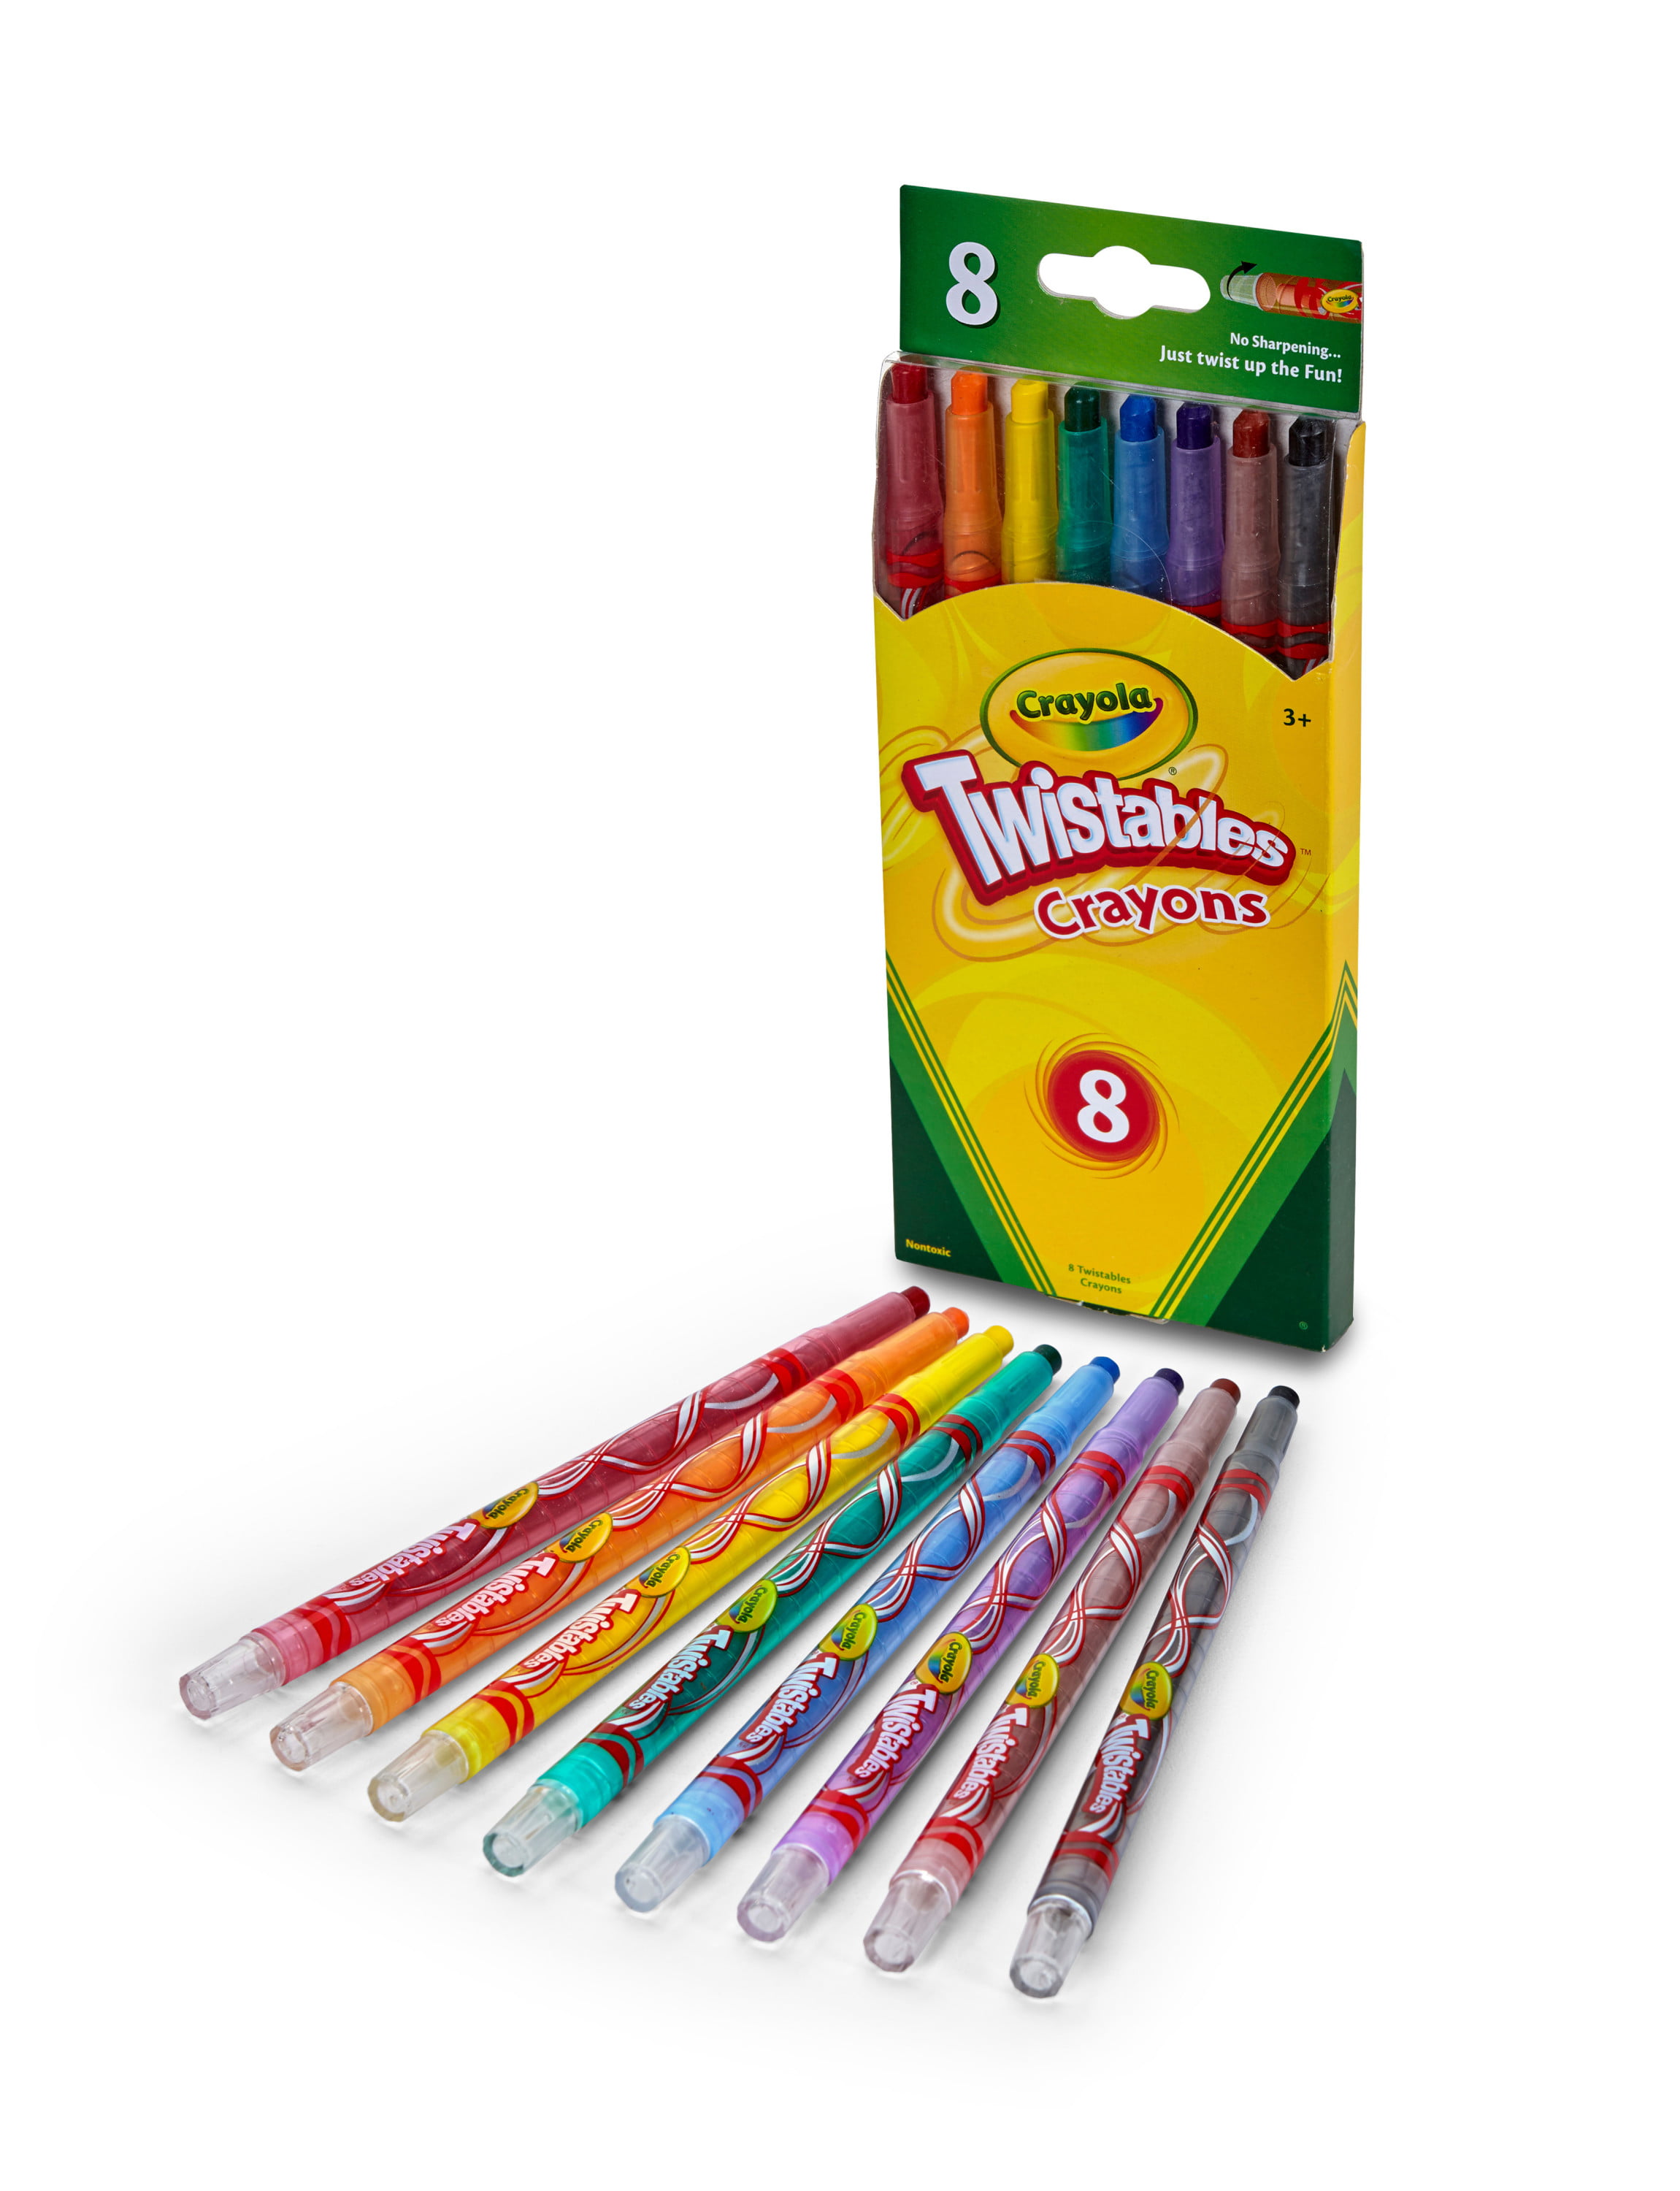 5x Crayola 30 Ct Twistables Colored Pencils 150ct for sale online